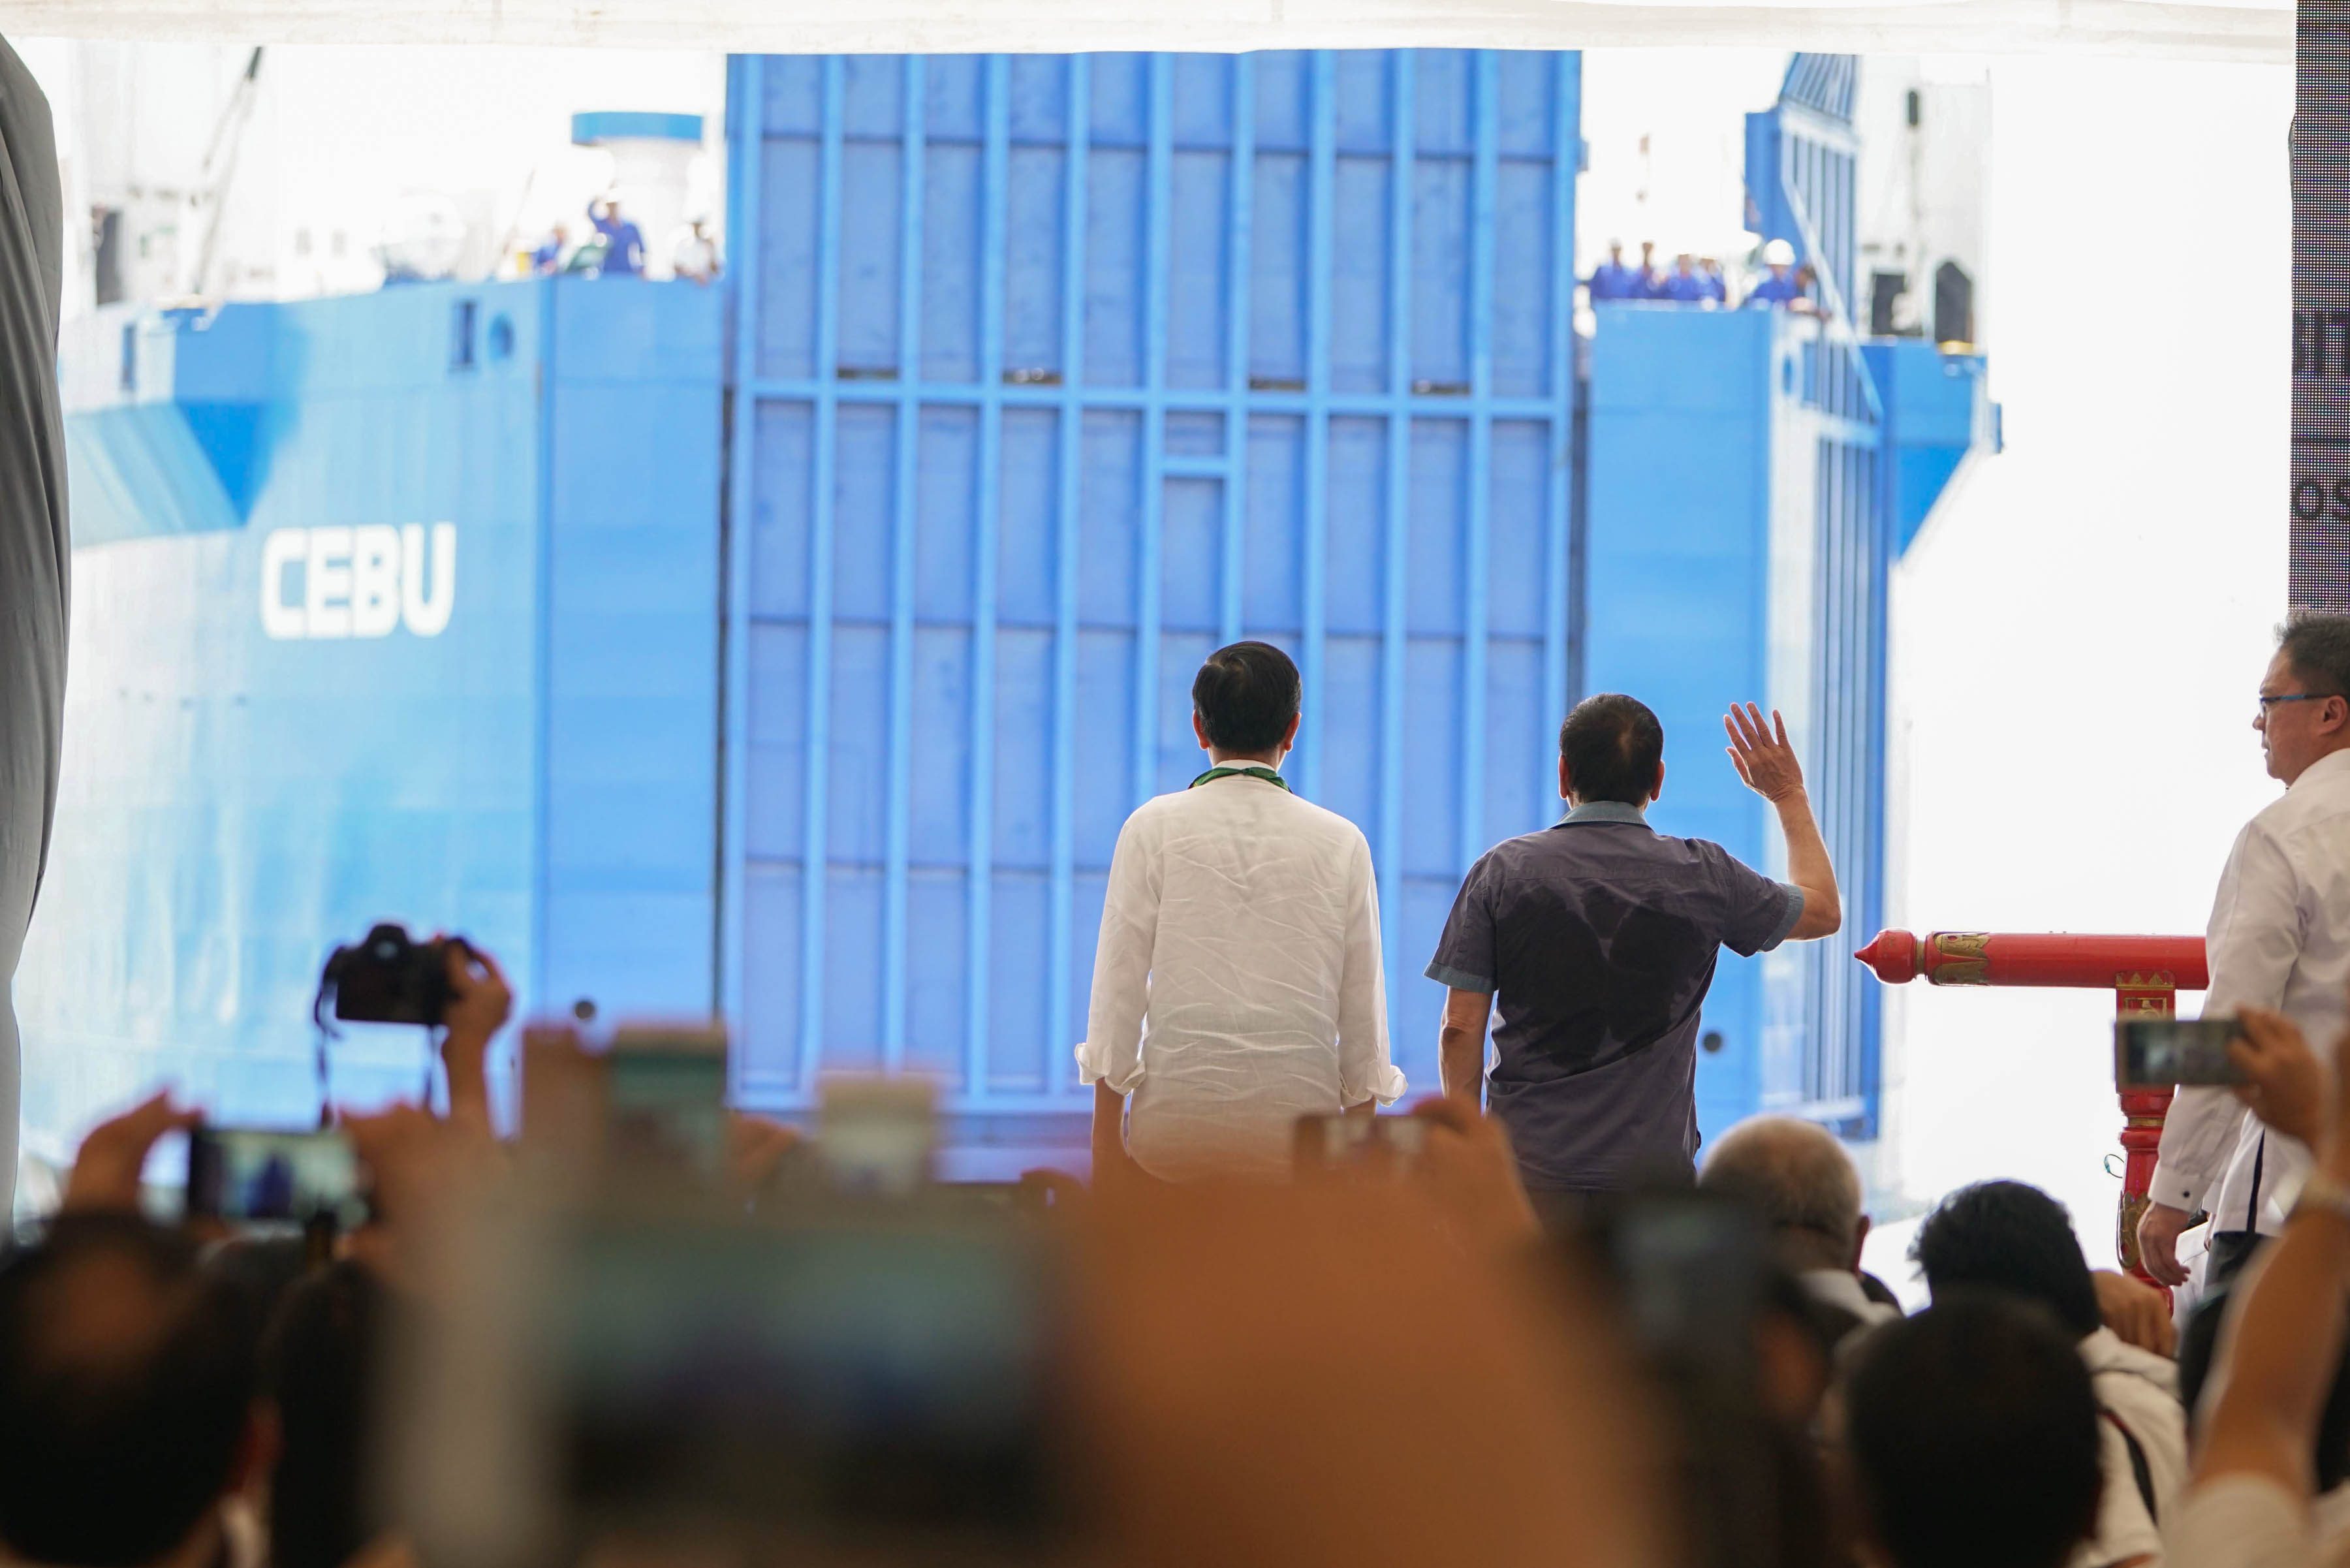 DIPLOMACY BOAT. President Rodrigo Duterte and Indonesian President Joko Widodo watch the Roll-on/Roll-off shipping vessel as it sails past Kudos Port in Sasa, Davao City, during the launch of the Davao-General Santos-Bitung RORO shipping service on April 30, 2017. Malacanang Photo   